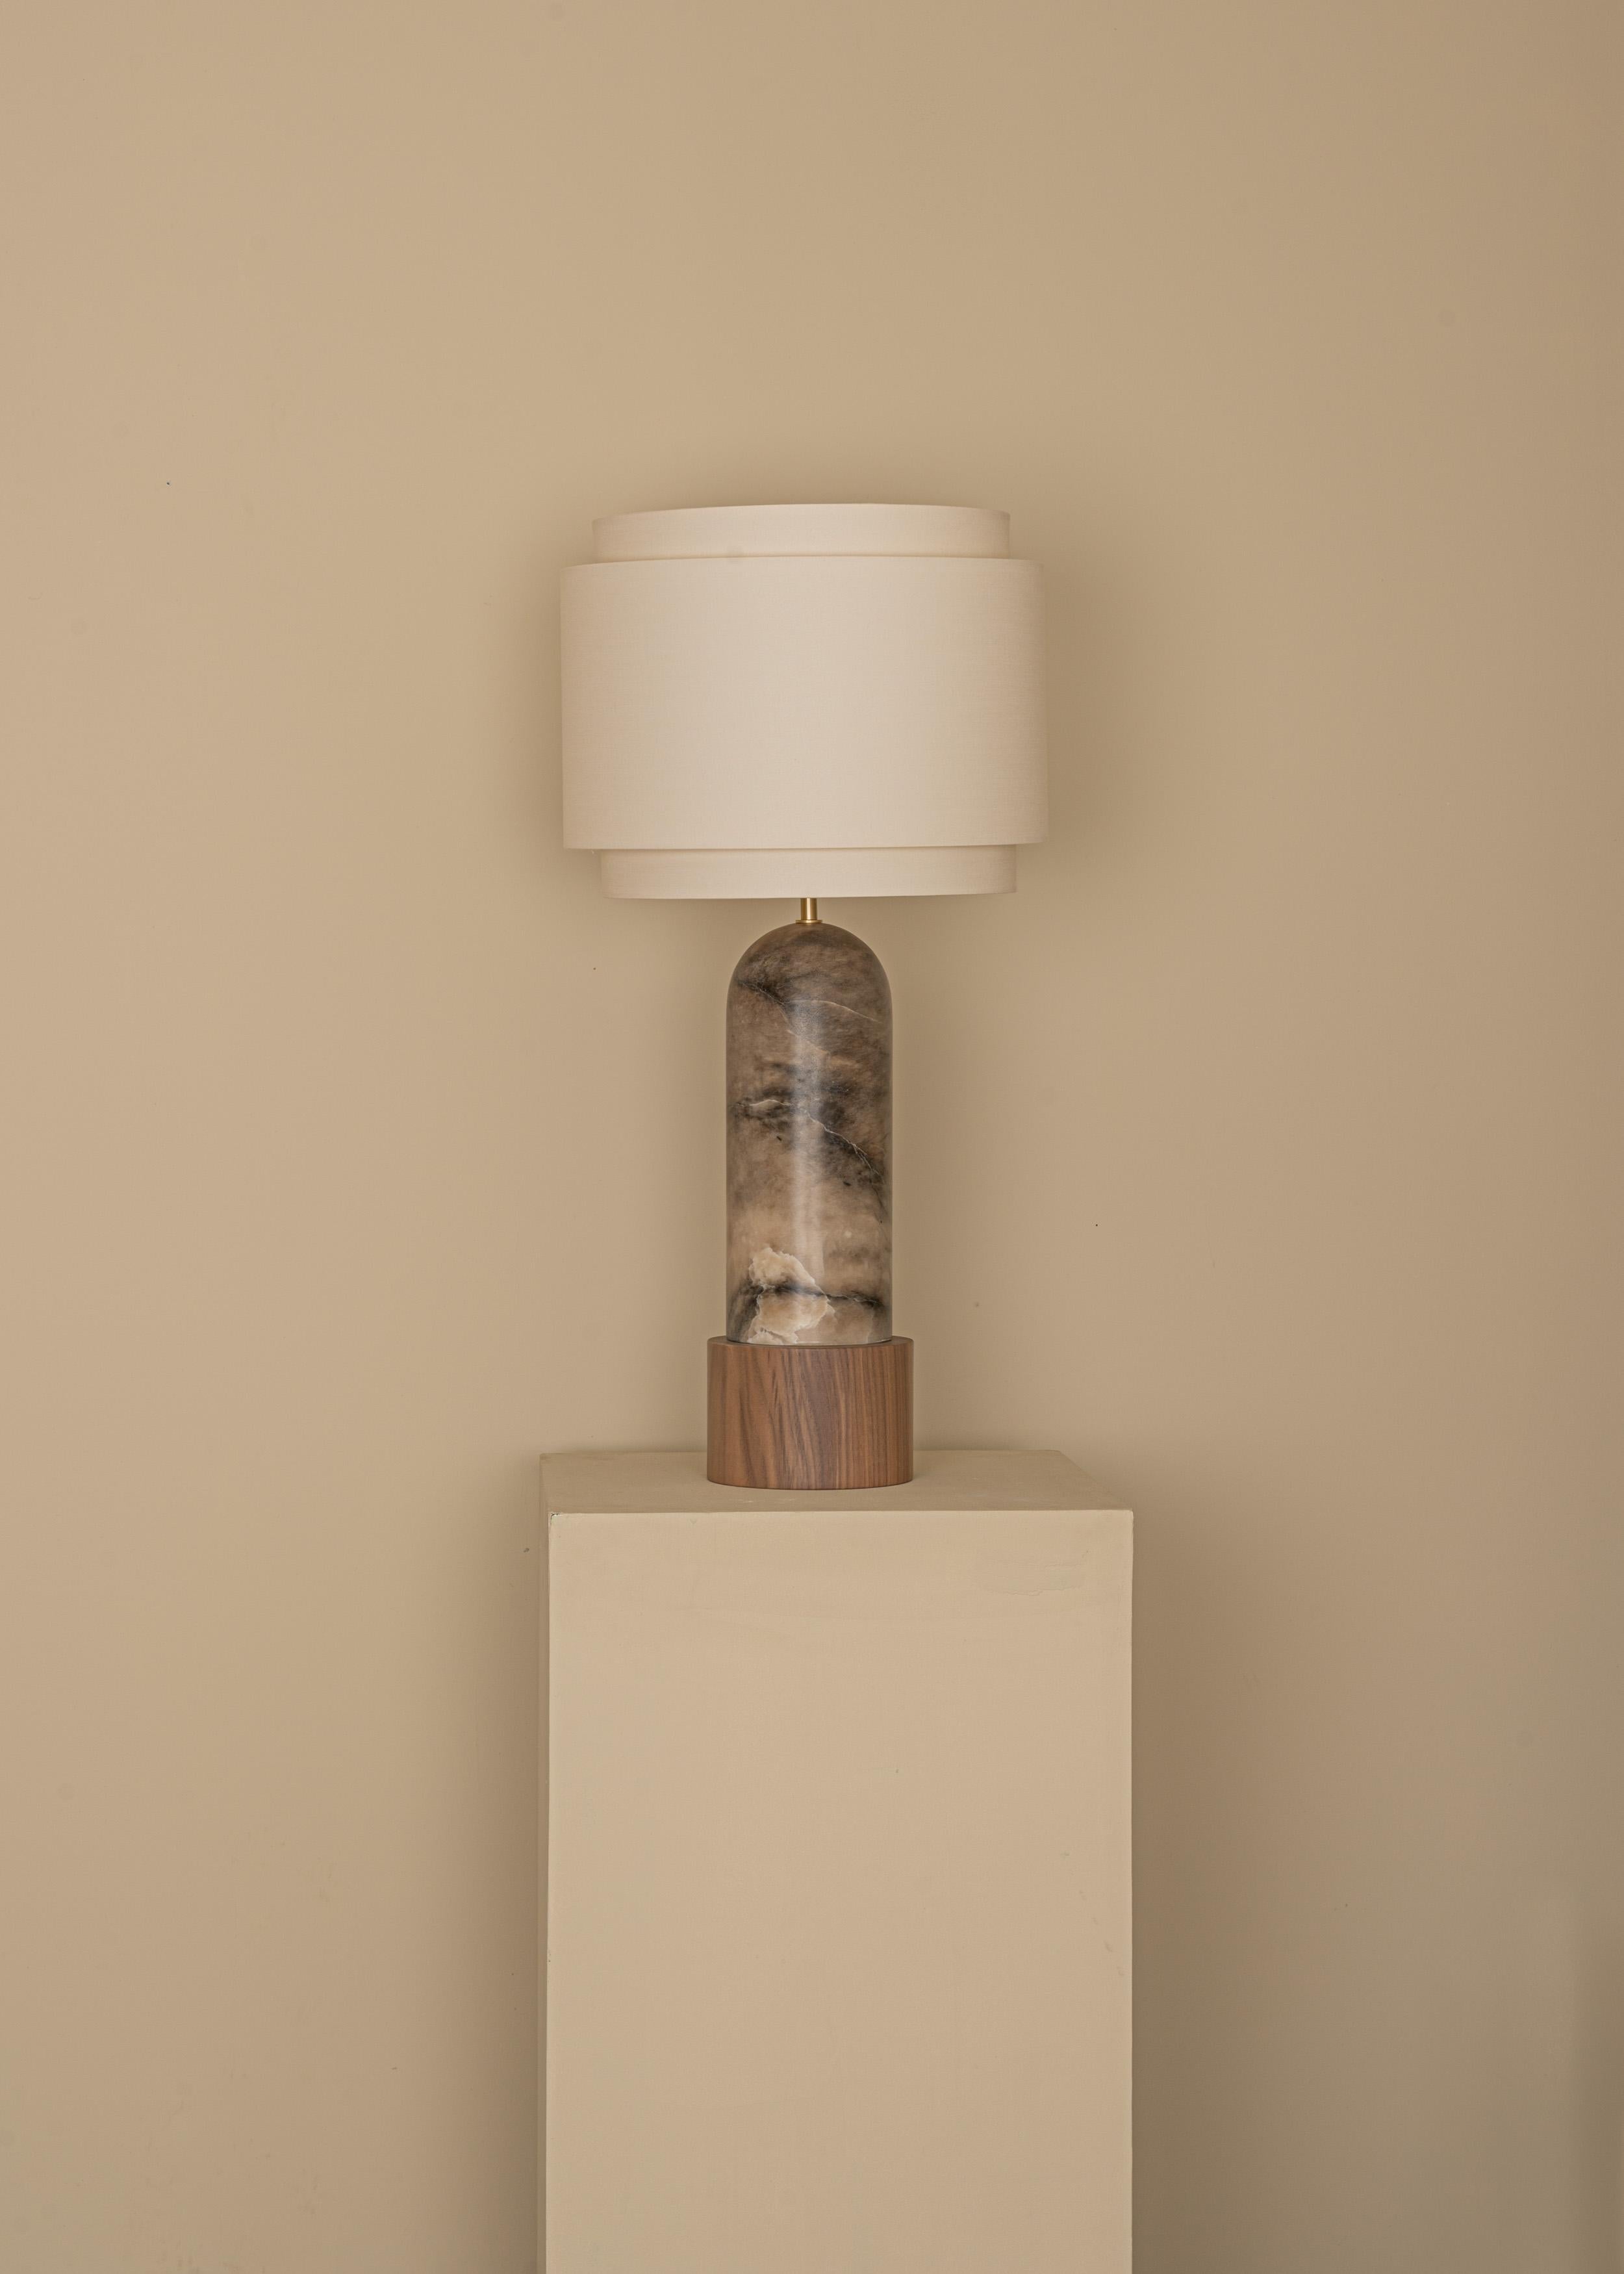 Tobacco Alabaster And Walnut Base Pura Kelo Double Table Lamp by Simone & Marcel
Dimensions: D 35 x W 35 x H 69 cm.
Materials: Brass, cotton, walnut and tobacco alabaster.

Also available in different marble, wood and alabaster options and finishes.